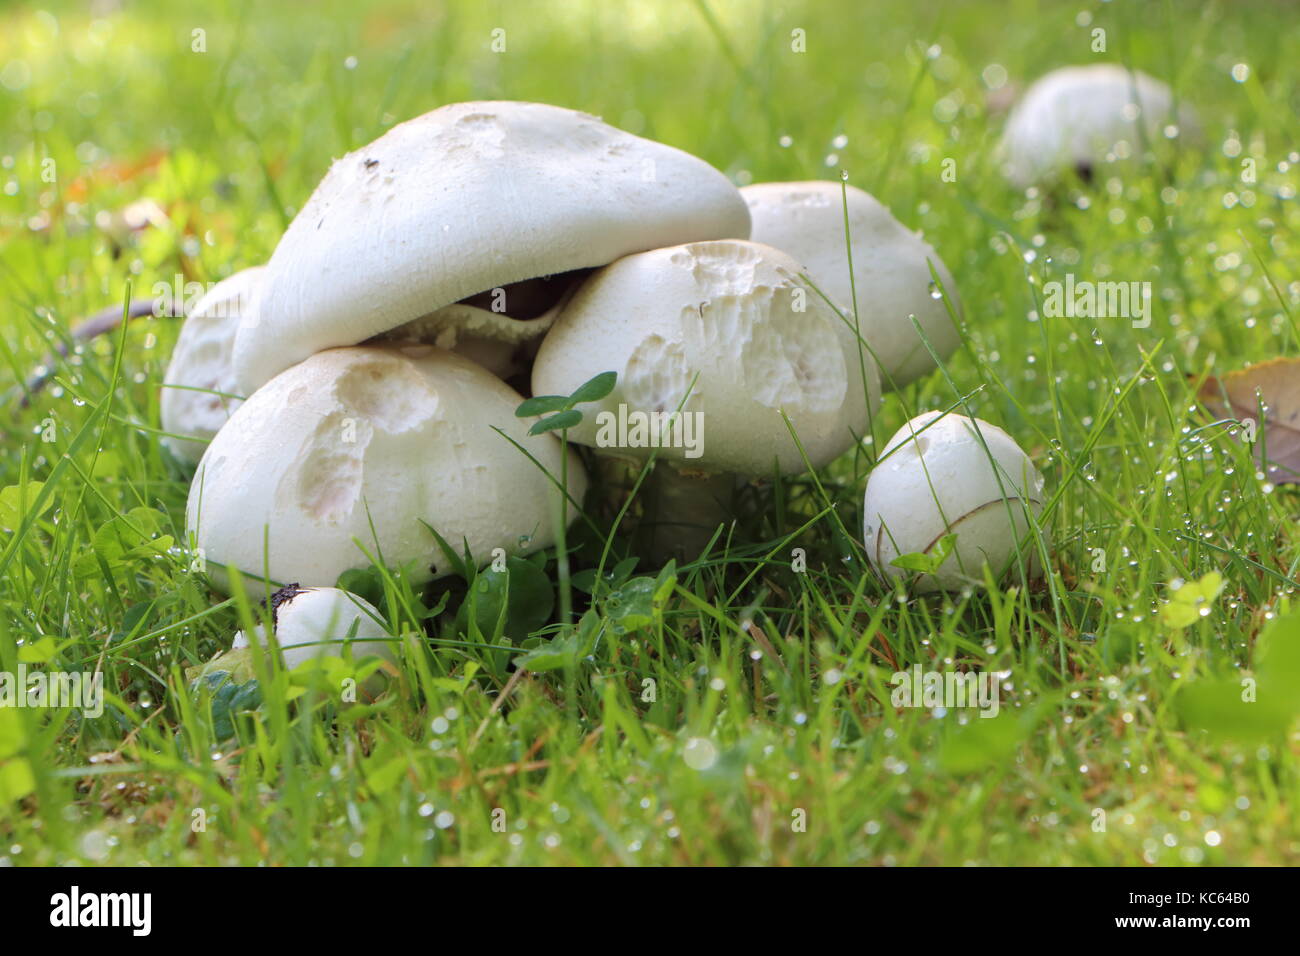 Field mushrooms and dewdrops in grass during autumn Stock Photo